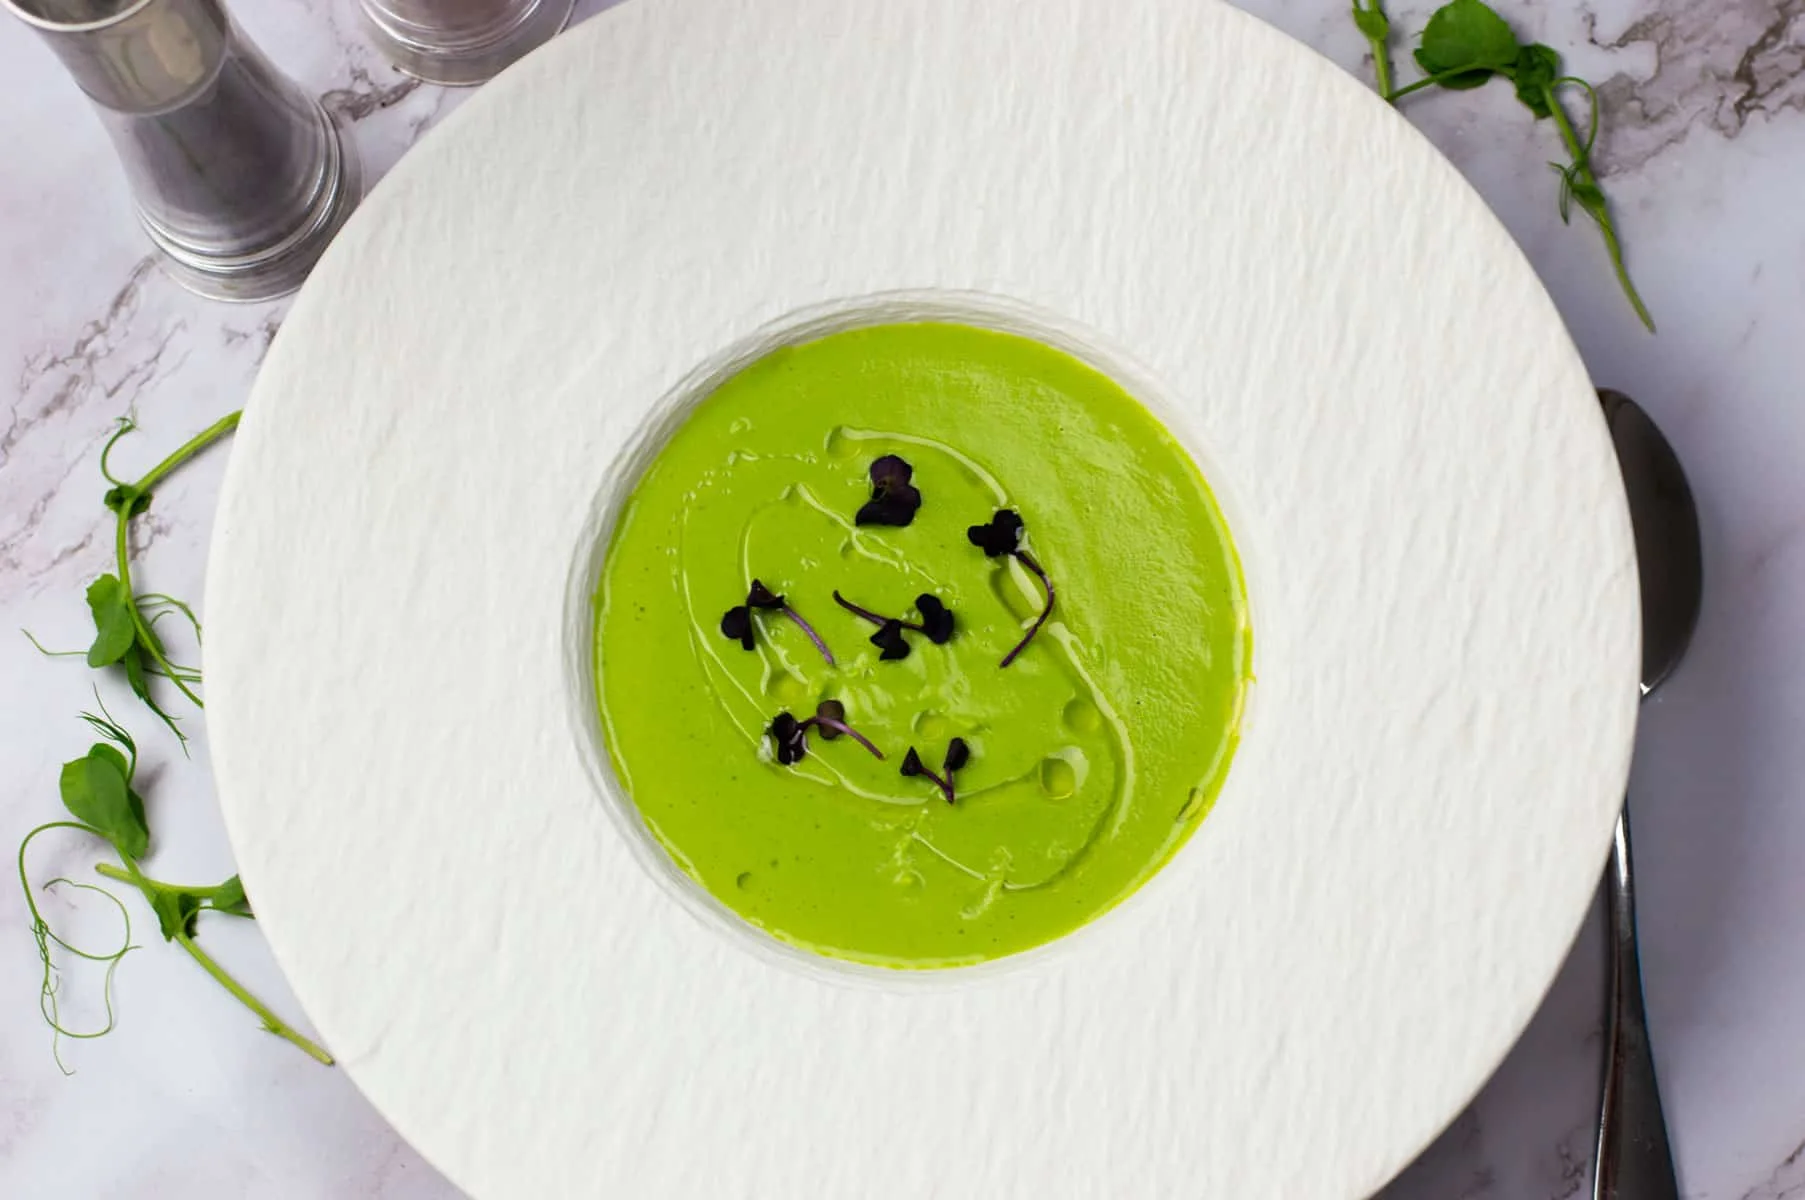 Pea soup with white truffle oil in a white bowl garnished with micro herbs